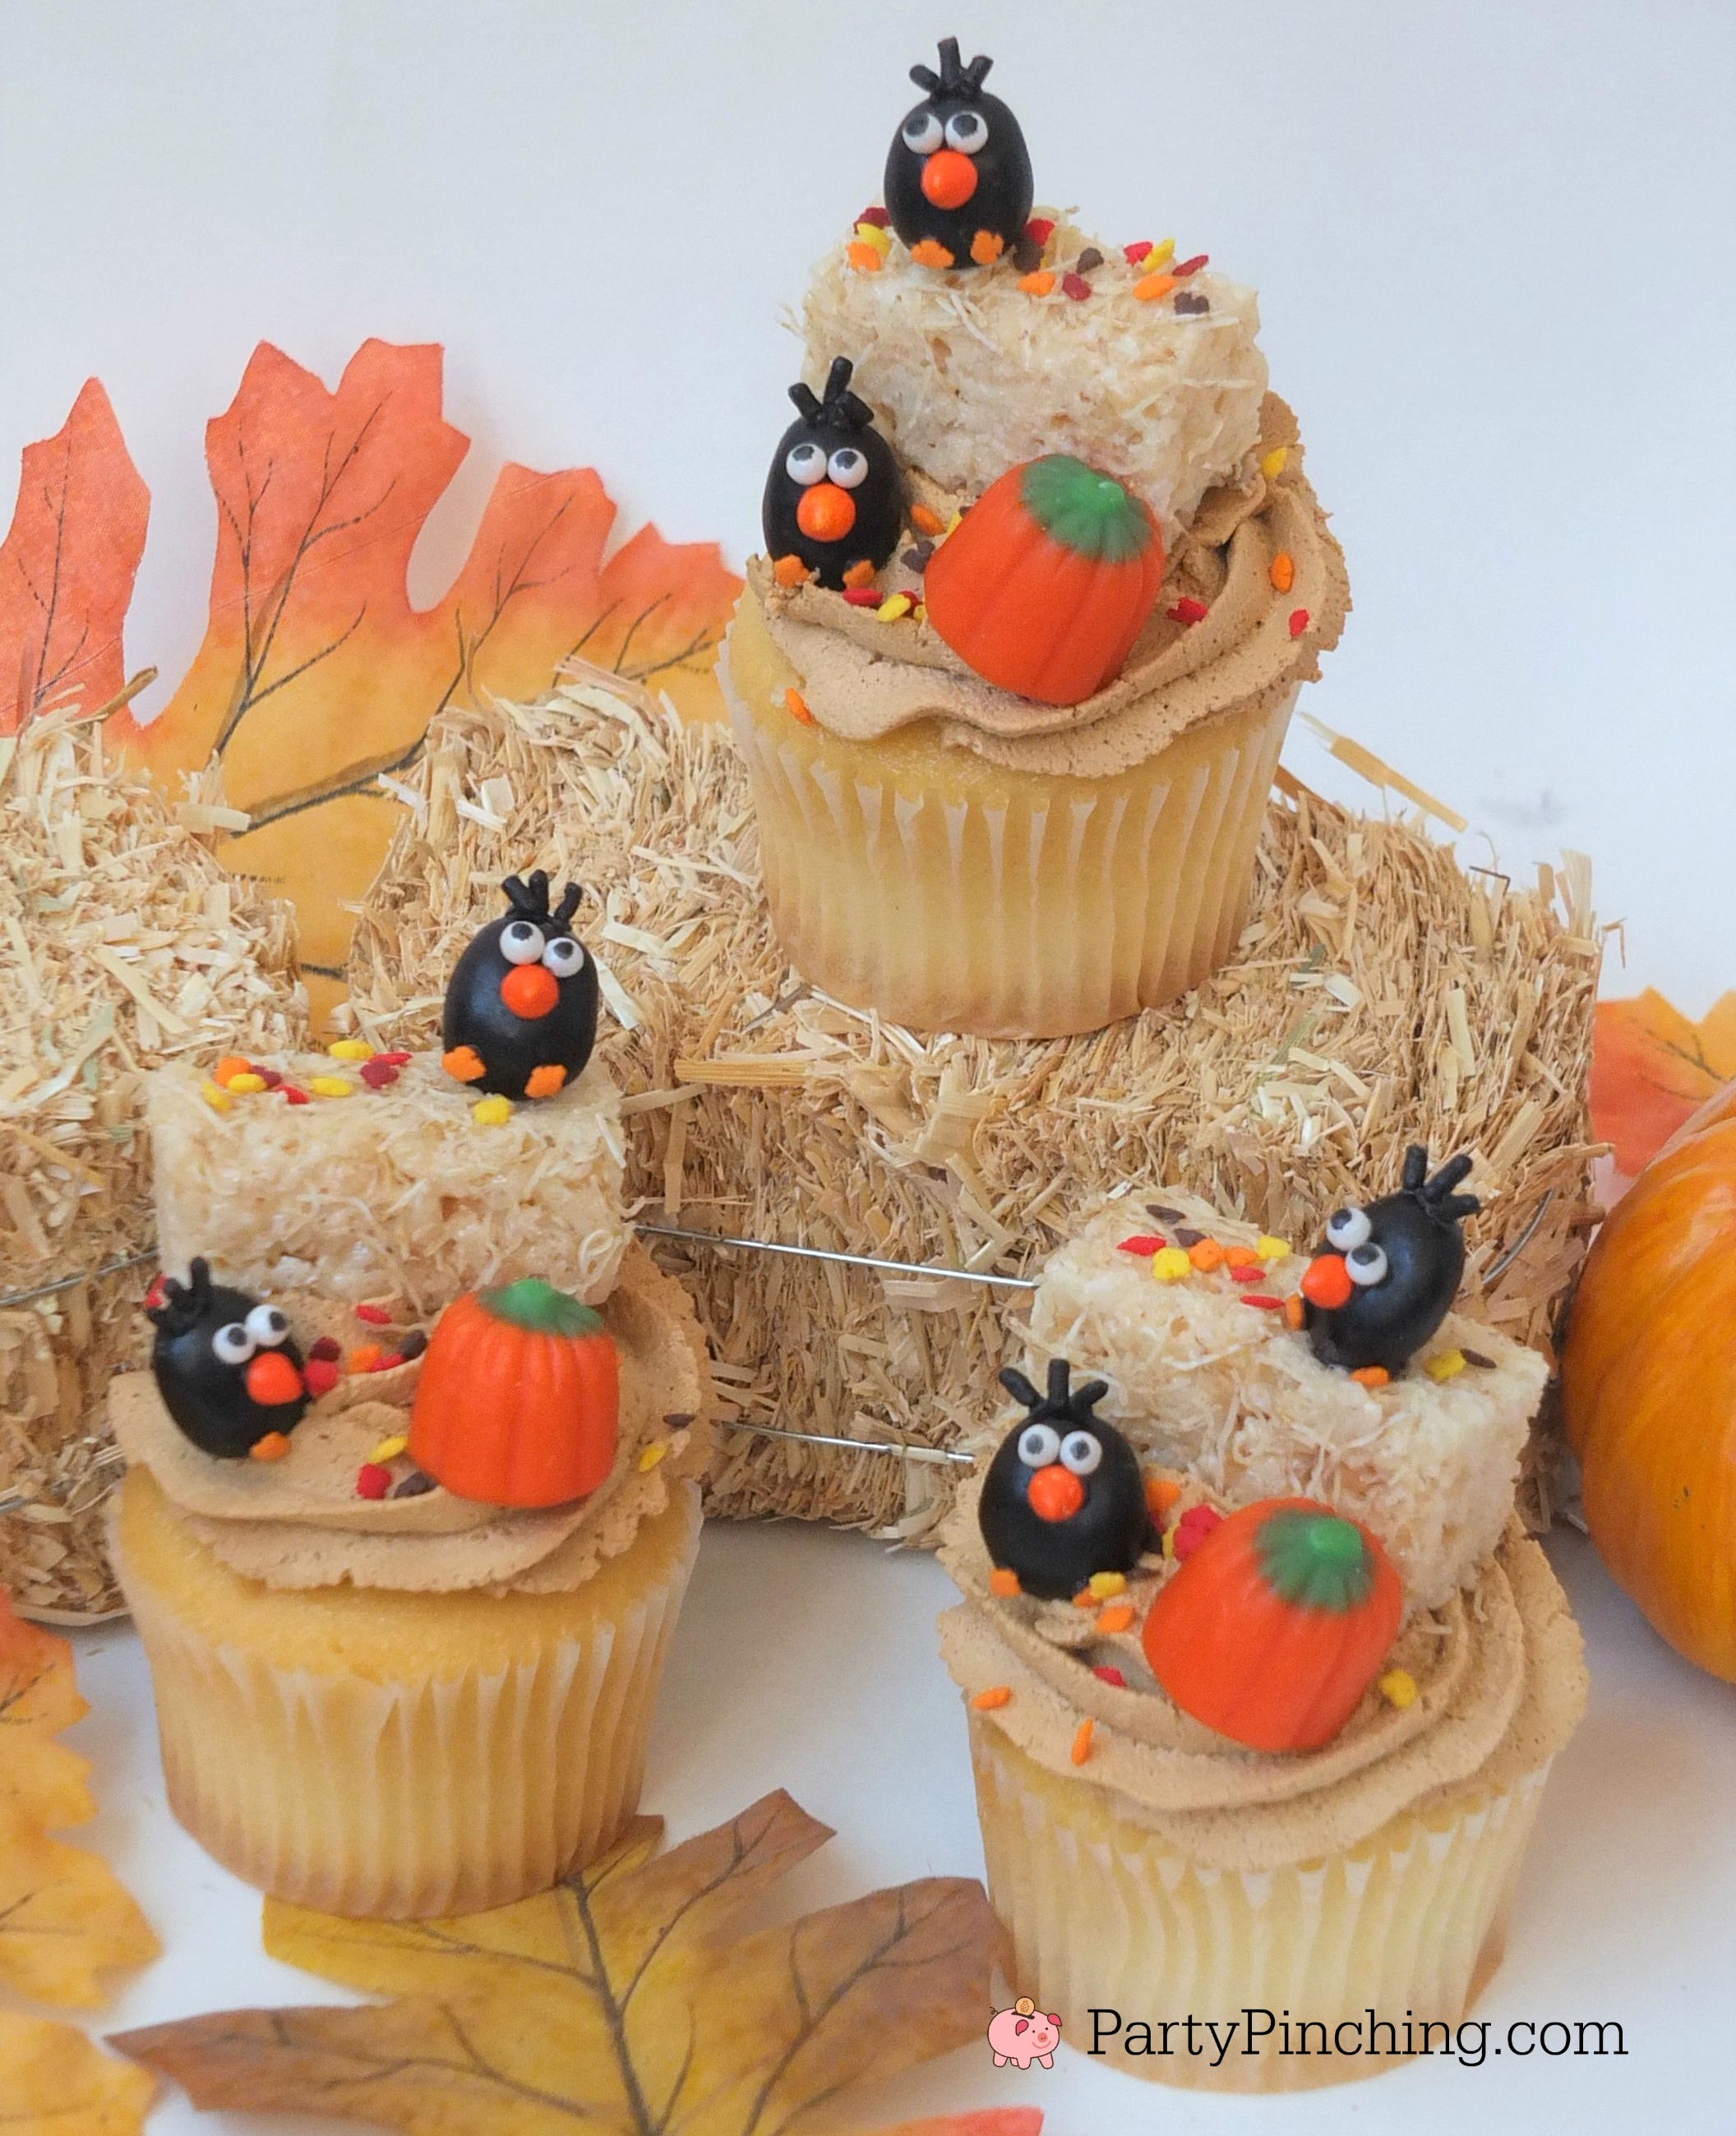 crow cupcakes, adorable autumn fall cupcakes, jelly bean crows, cute food, fun food for kids, hay bale cupcakes rice krispie haybales with leaf sprinkles, ask for whipped, caramel whipped icing frosting, harvest party ideas, thanksgiving cute dessert